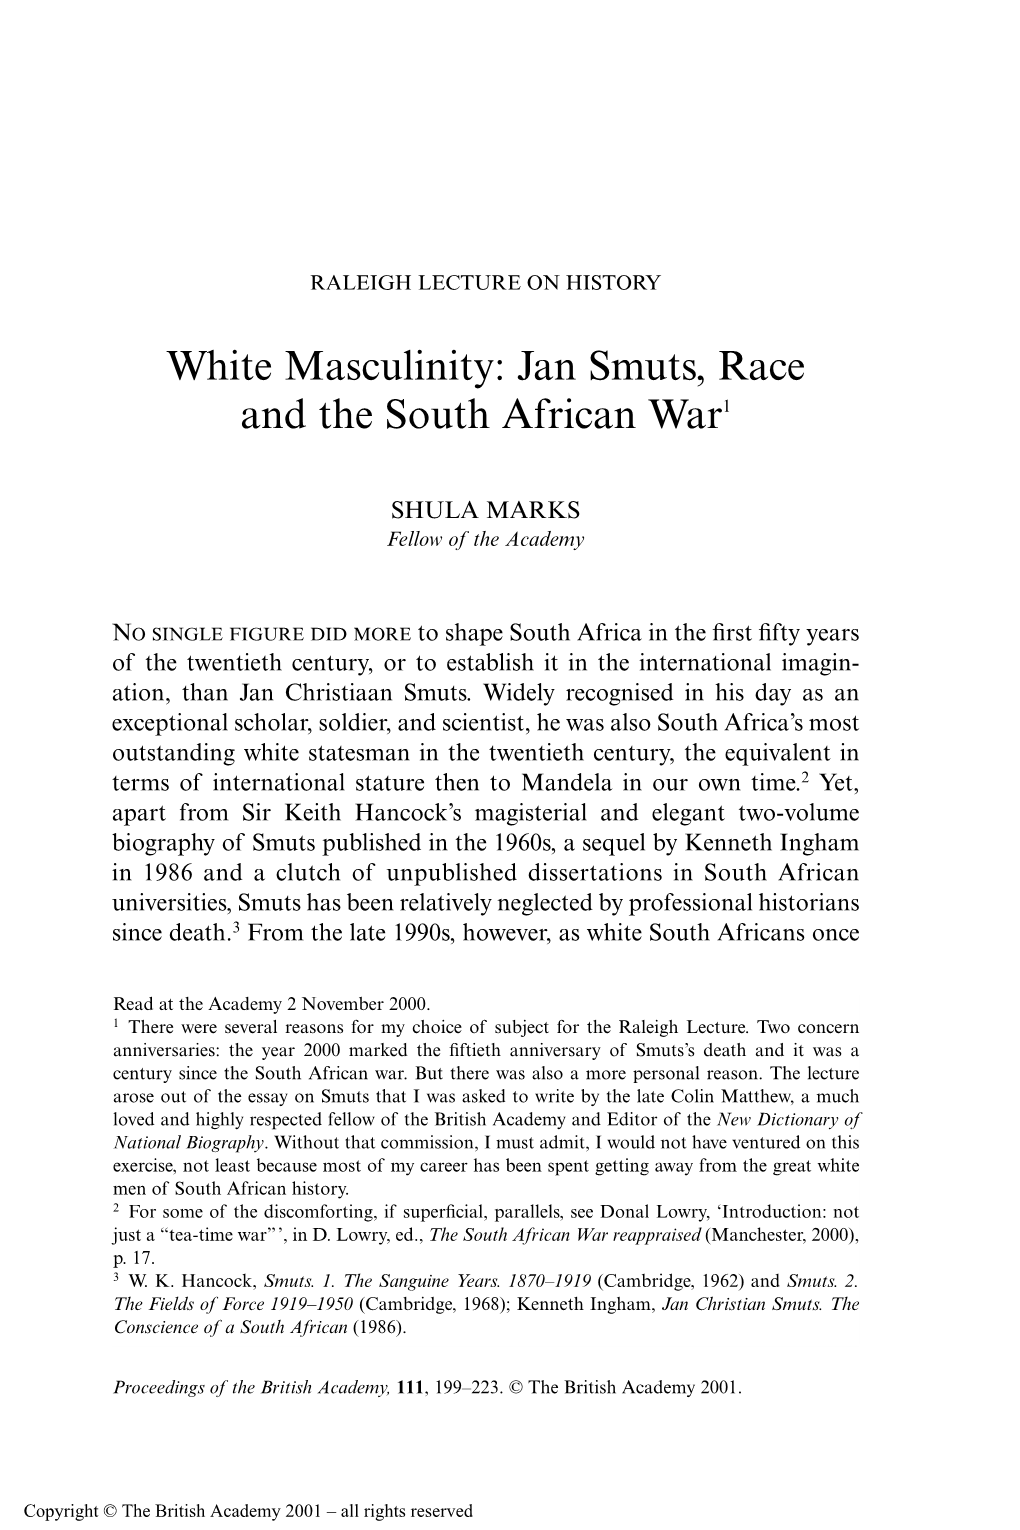 Jan Smuts, Race and the South African War1